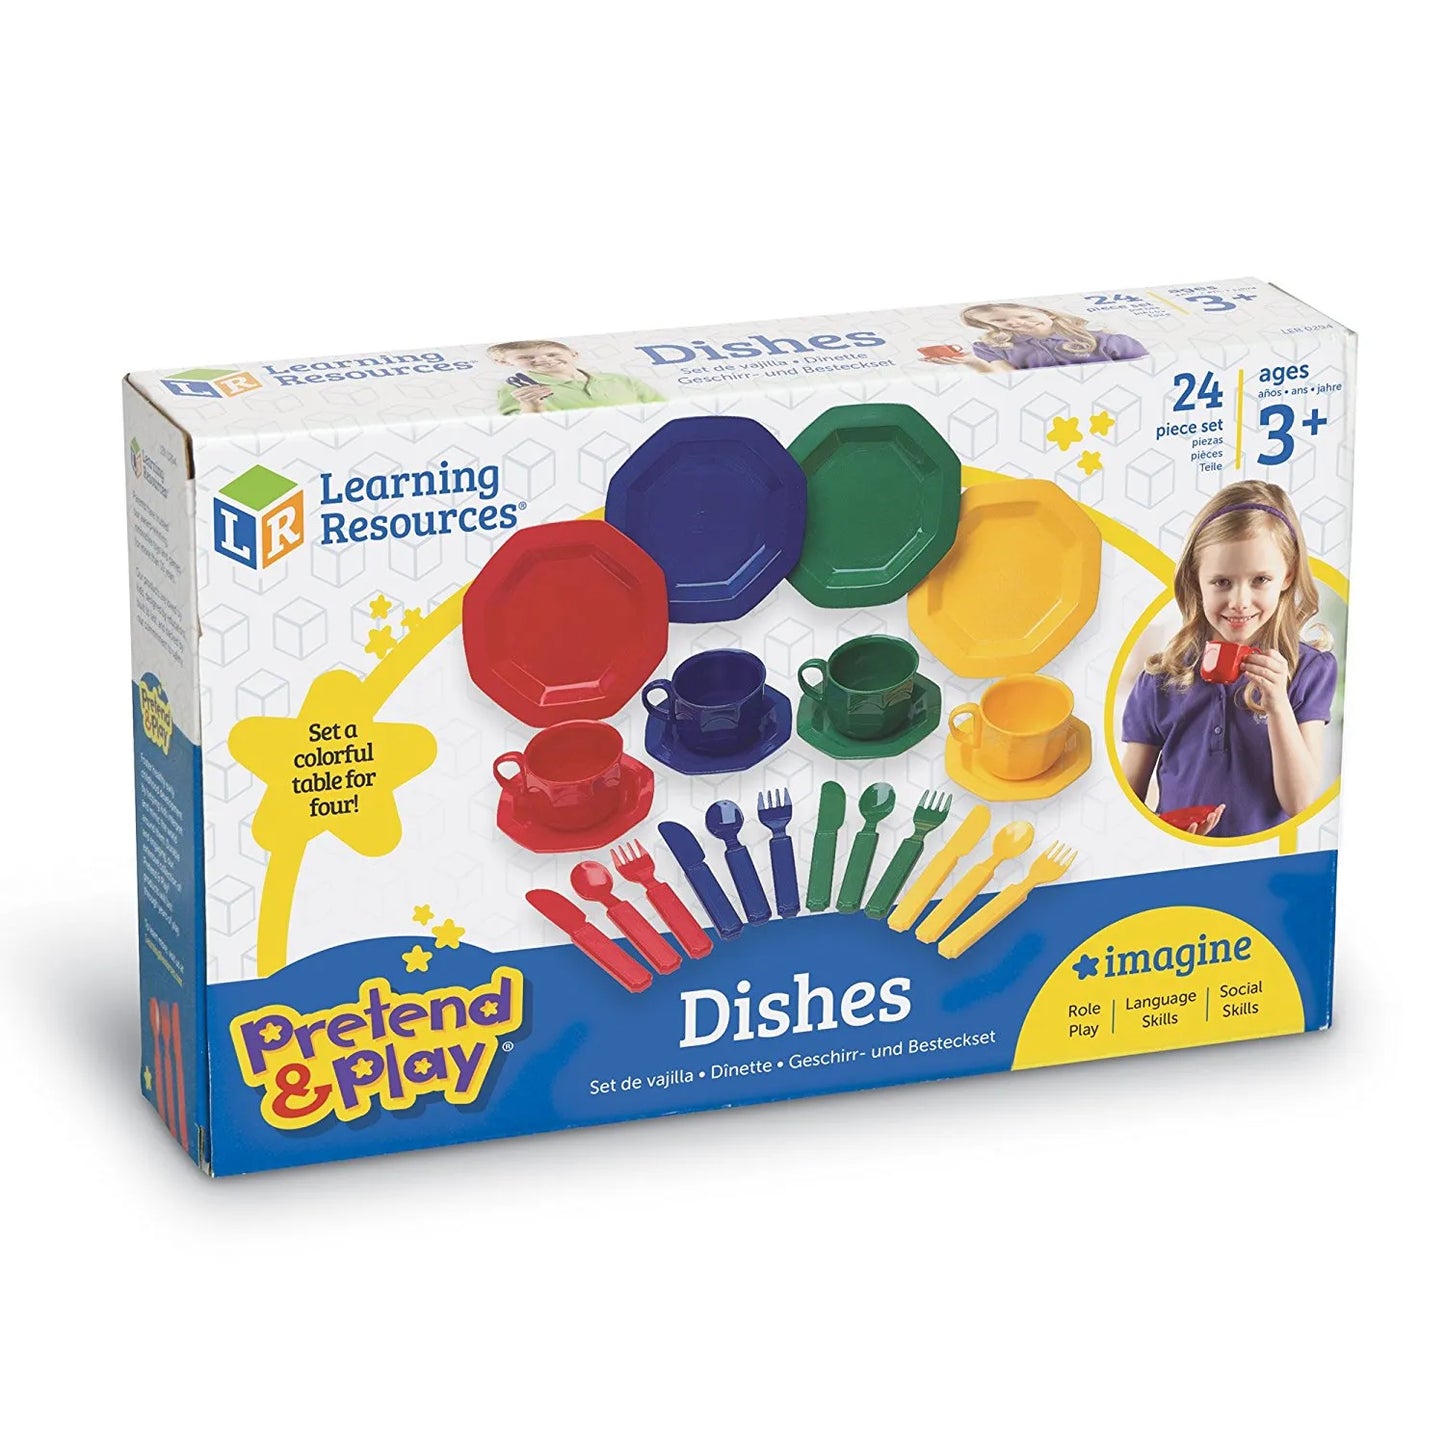 Learning Resources Dishes 24 Pcs Set